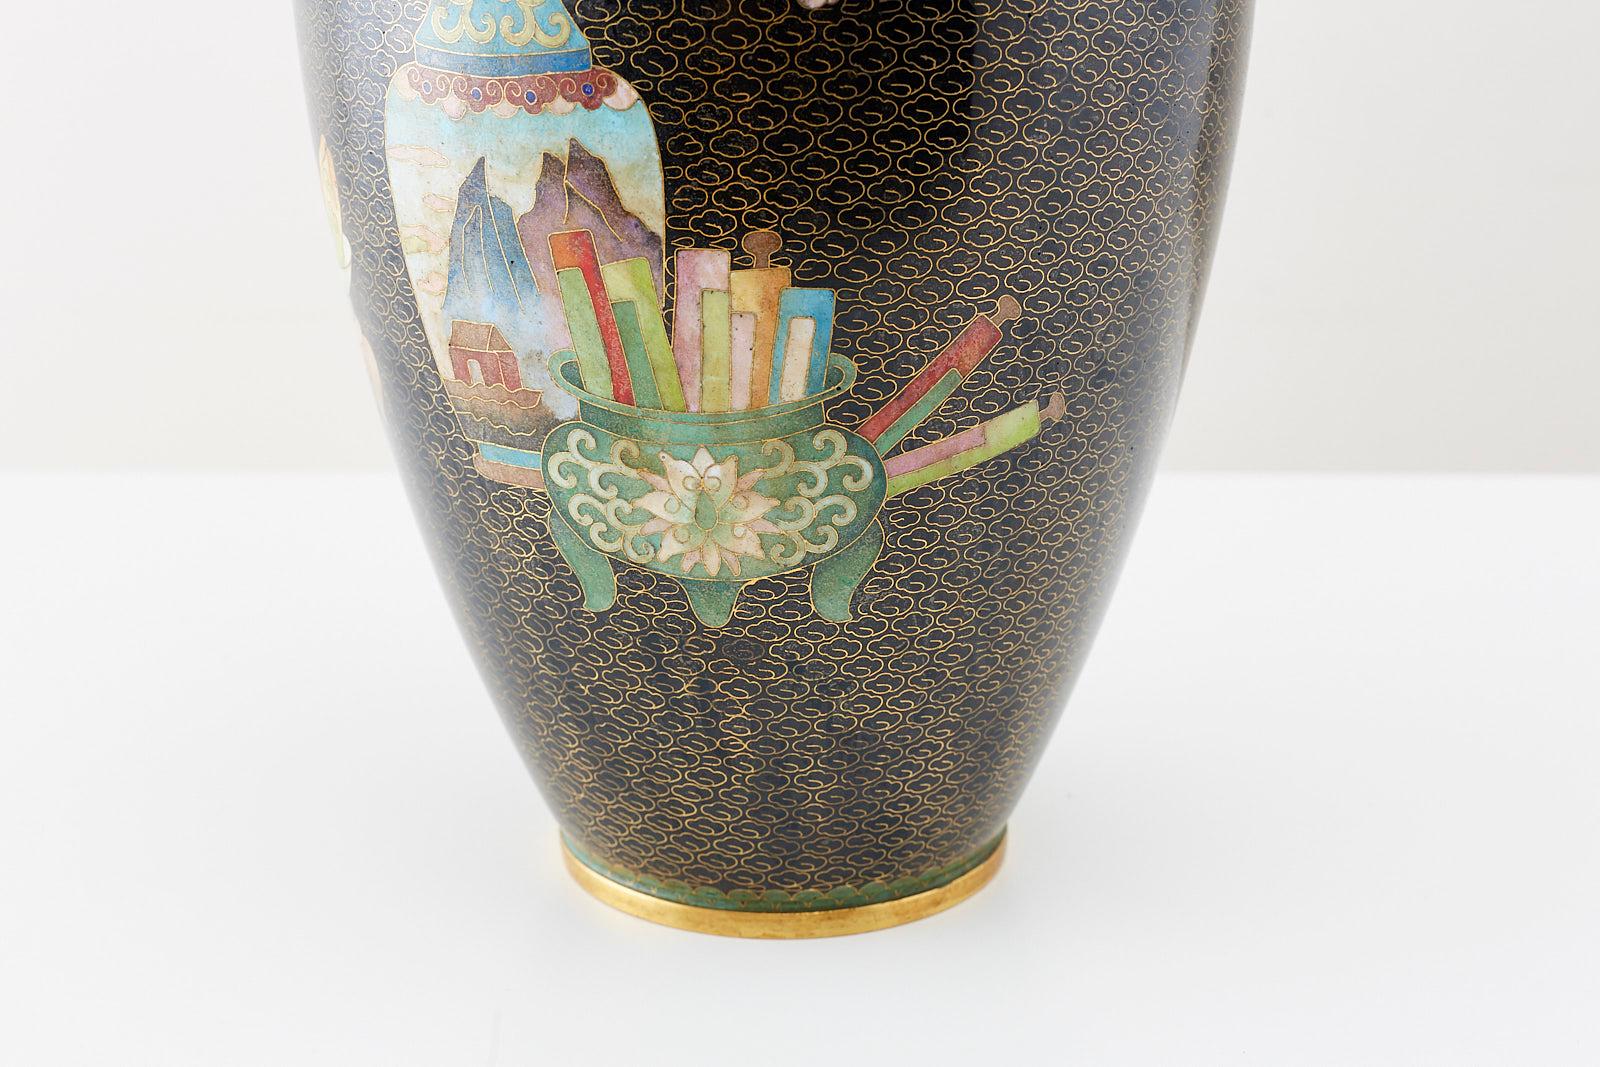 Large Chinese Cloisonné Vase with Floral Decoration In Good Condition For Sale In Rio Vista, CA